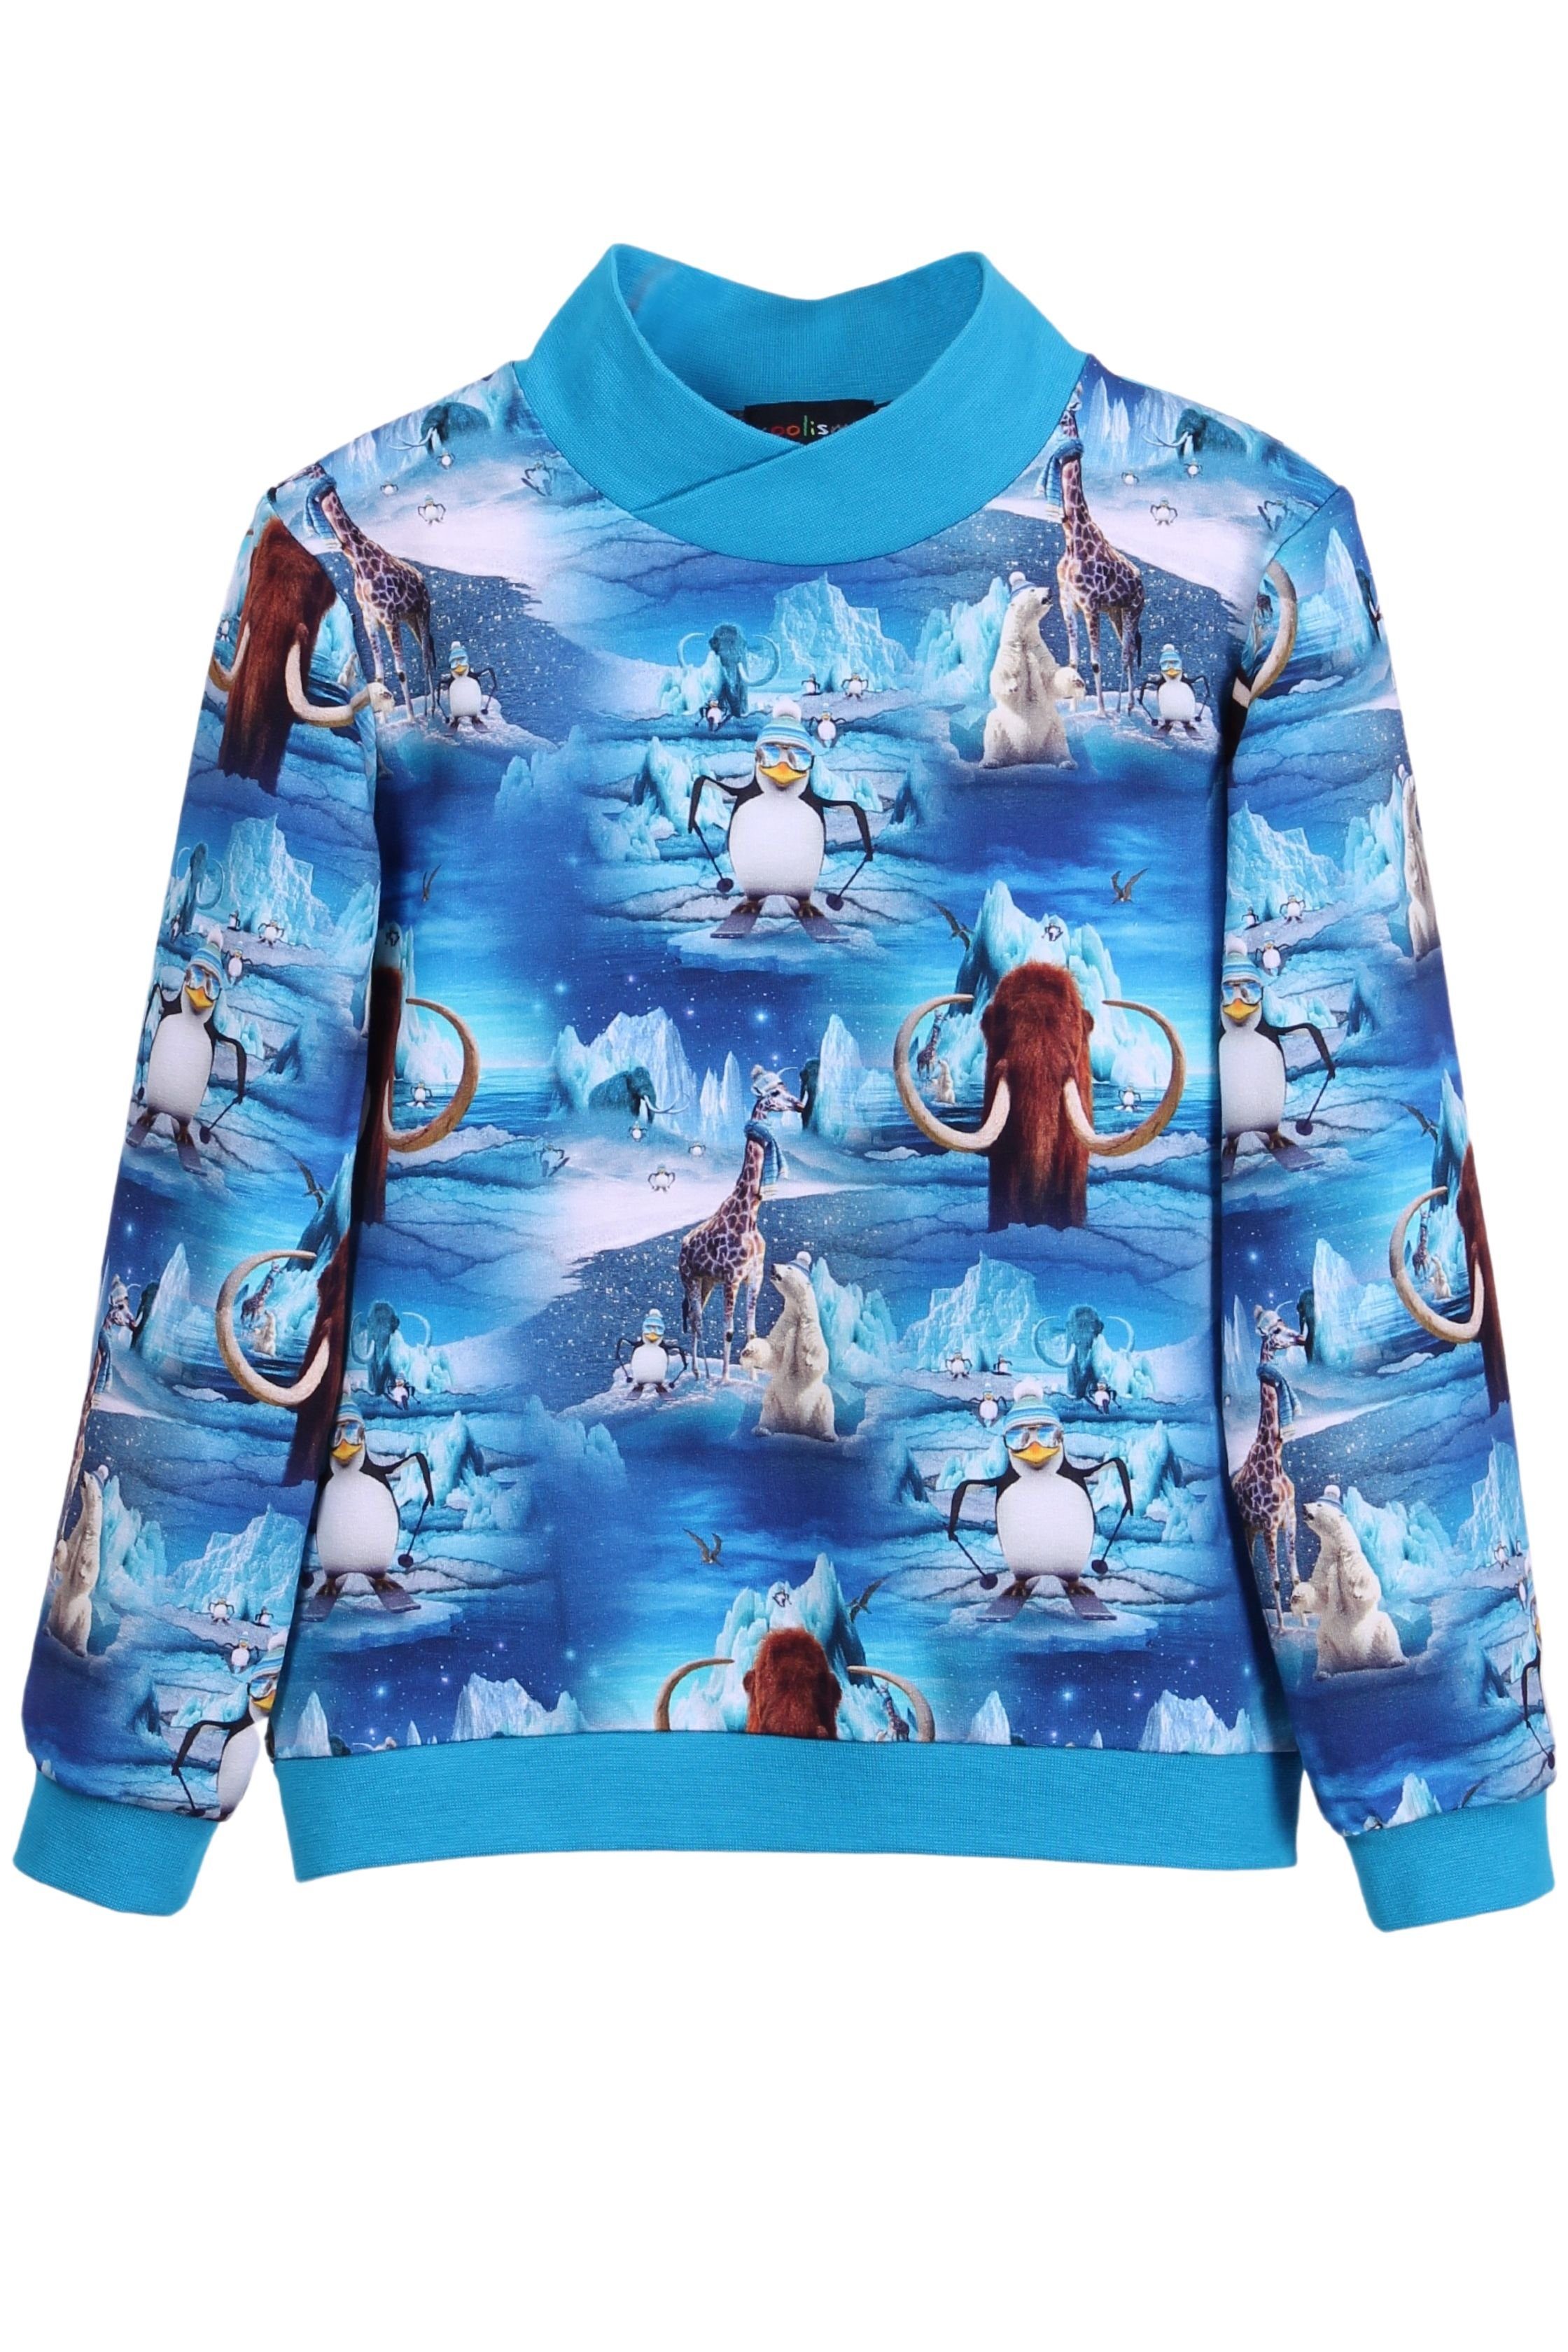 in AGE Europa Sweater mit ICE coolismo Print Kinder Made Jungen Sweatershirt